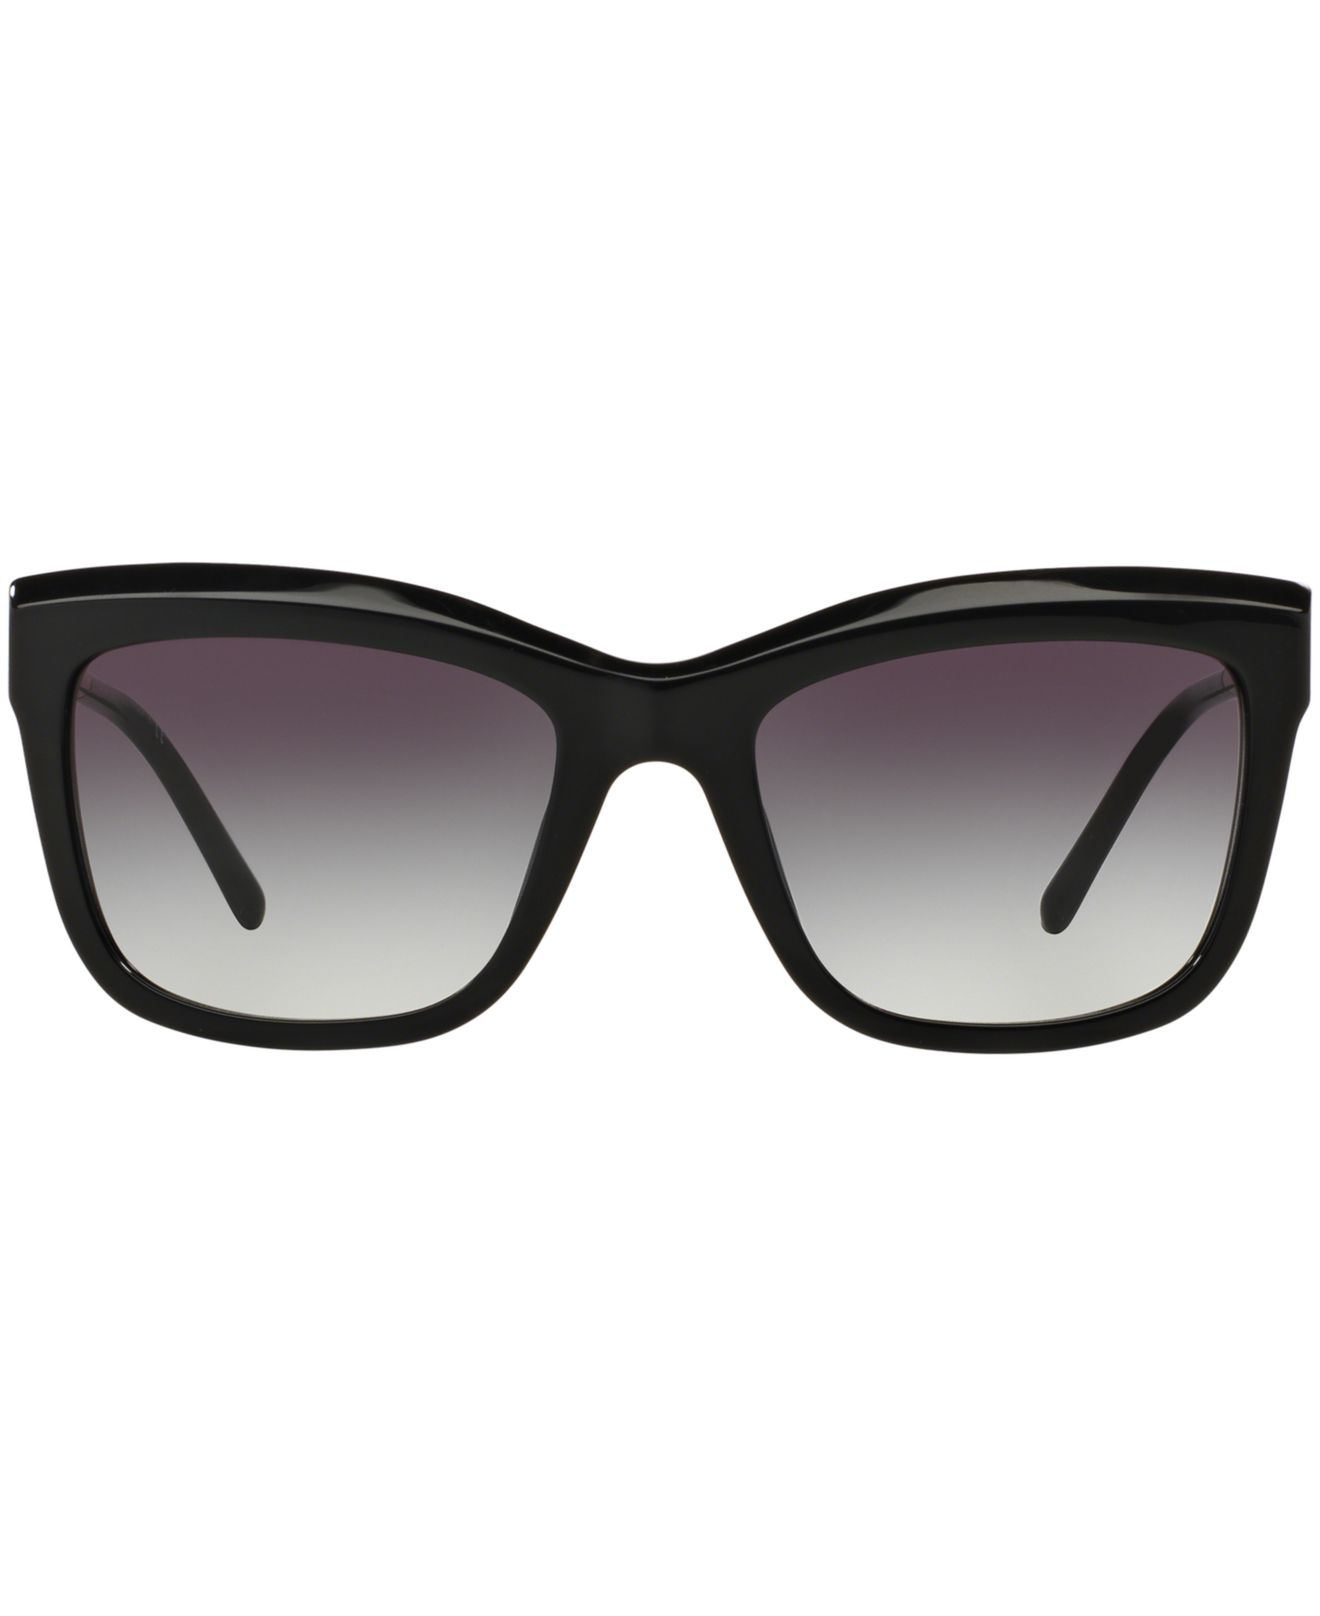 Lyst - Burberry Sunglasses, Be4207 in Black